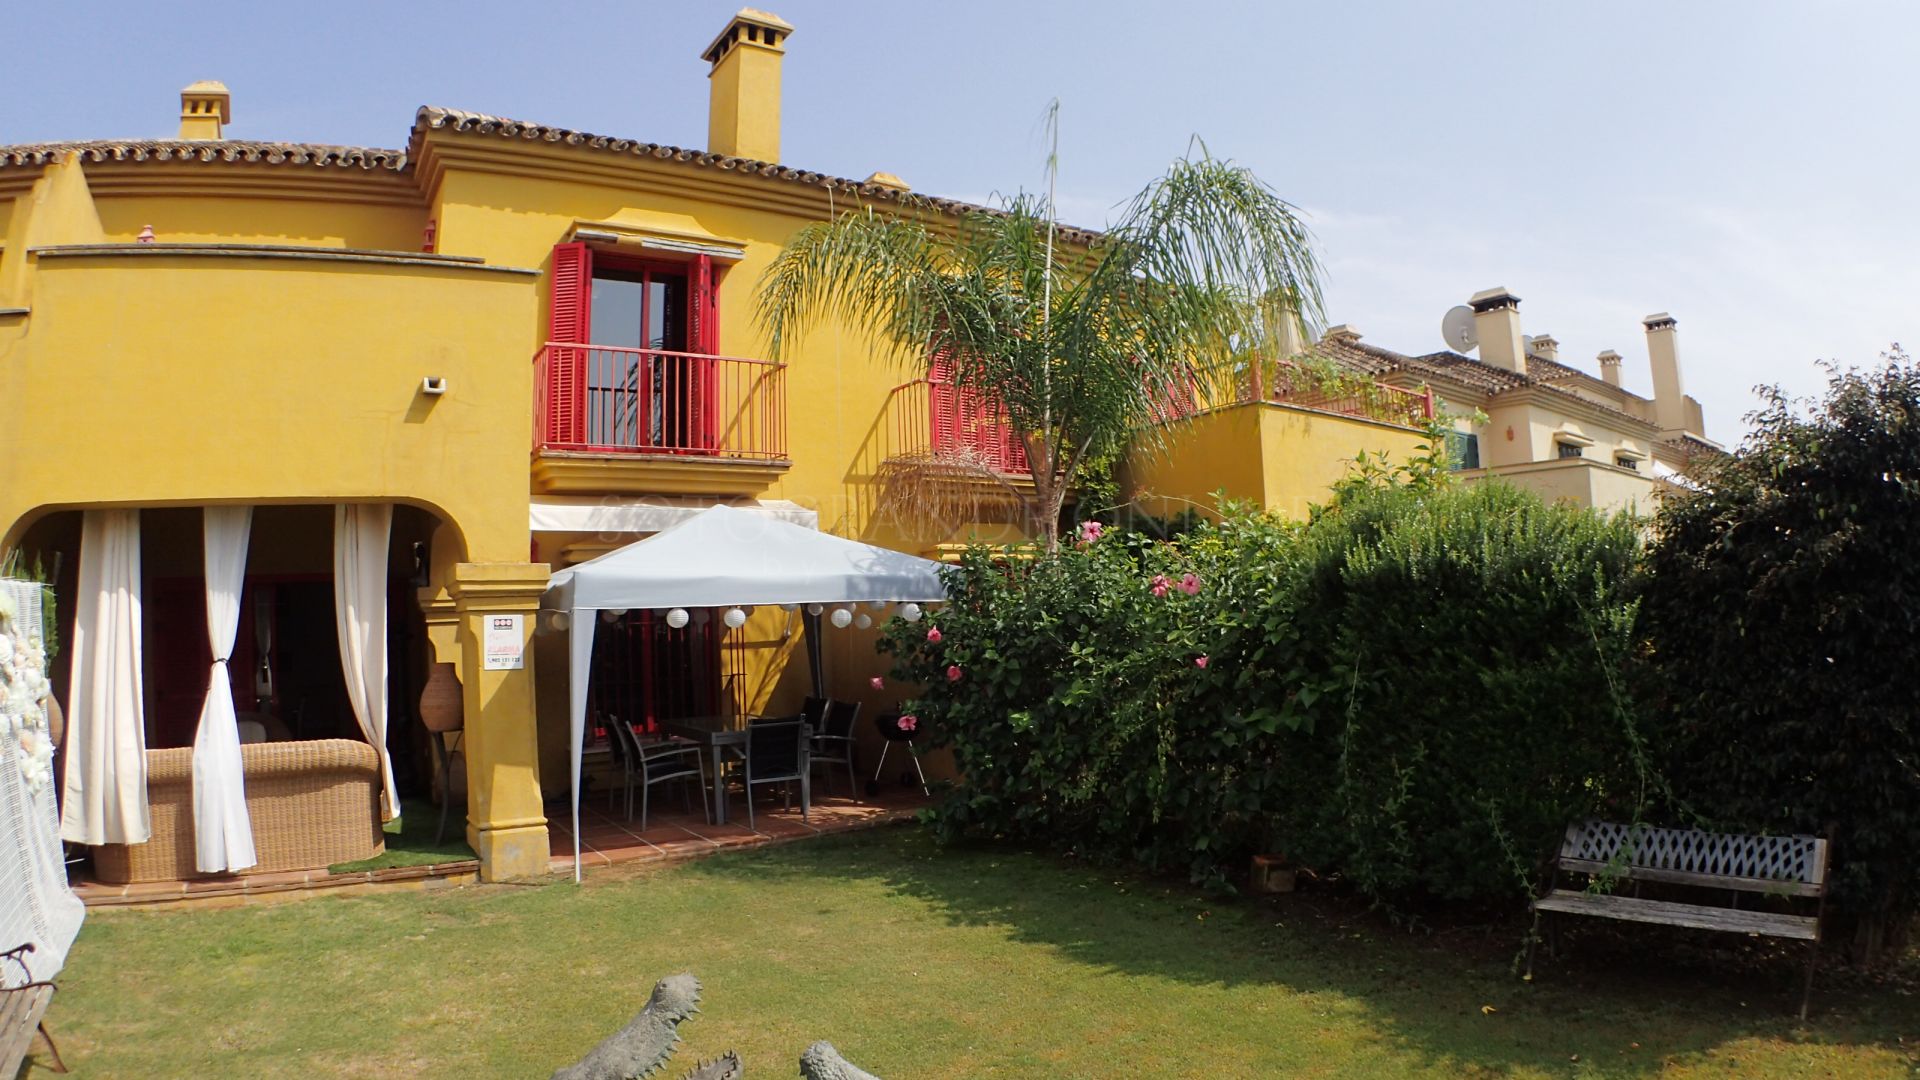 Townhouse for sale in the Casar de Fronda